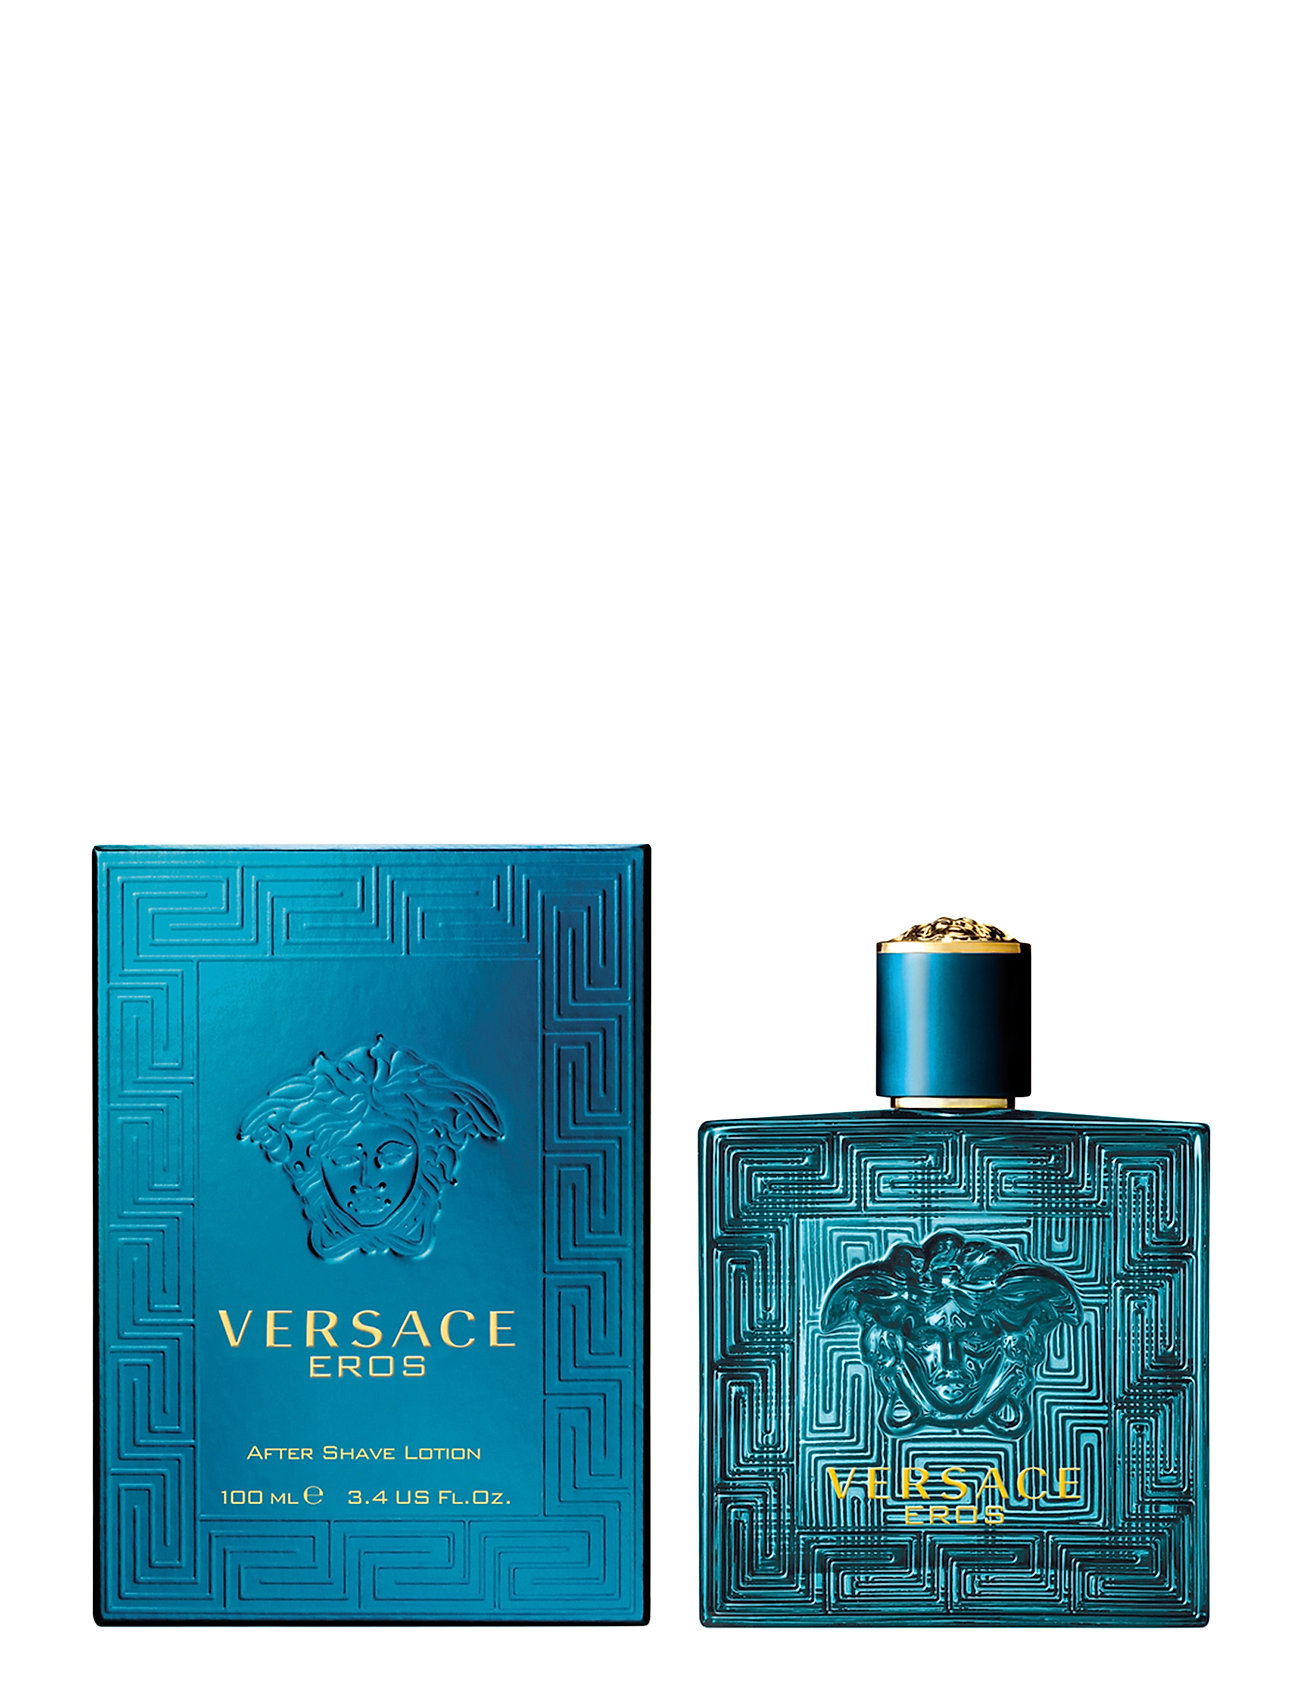 Versace Eros Pour Homme After Shave 100ml Beauty MEN Shaving Products After Shave Nude Versace Fragrance